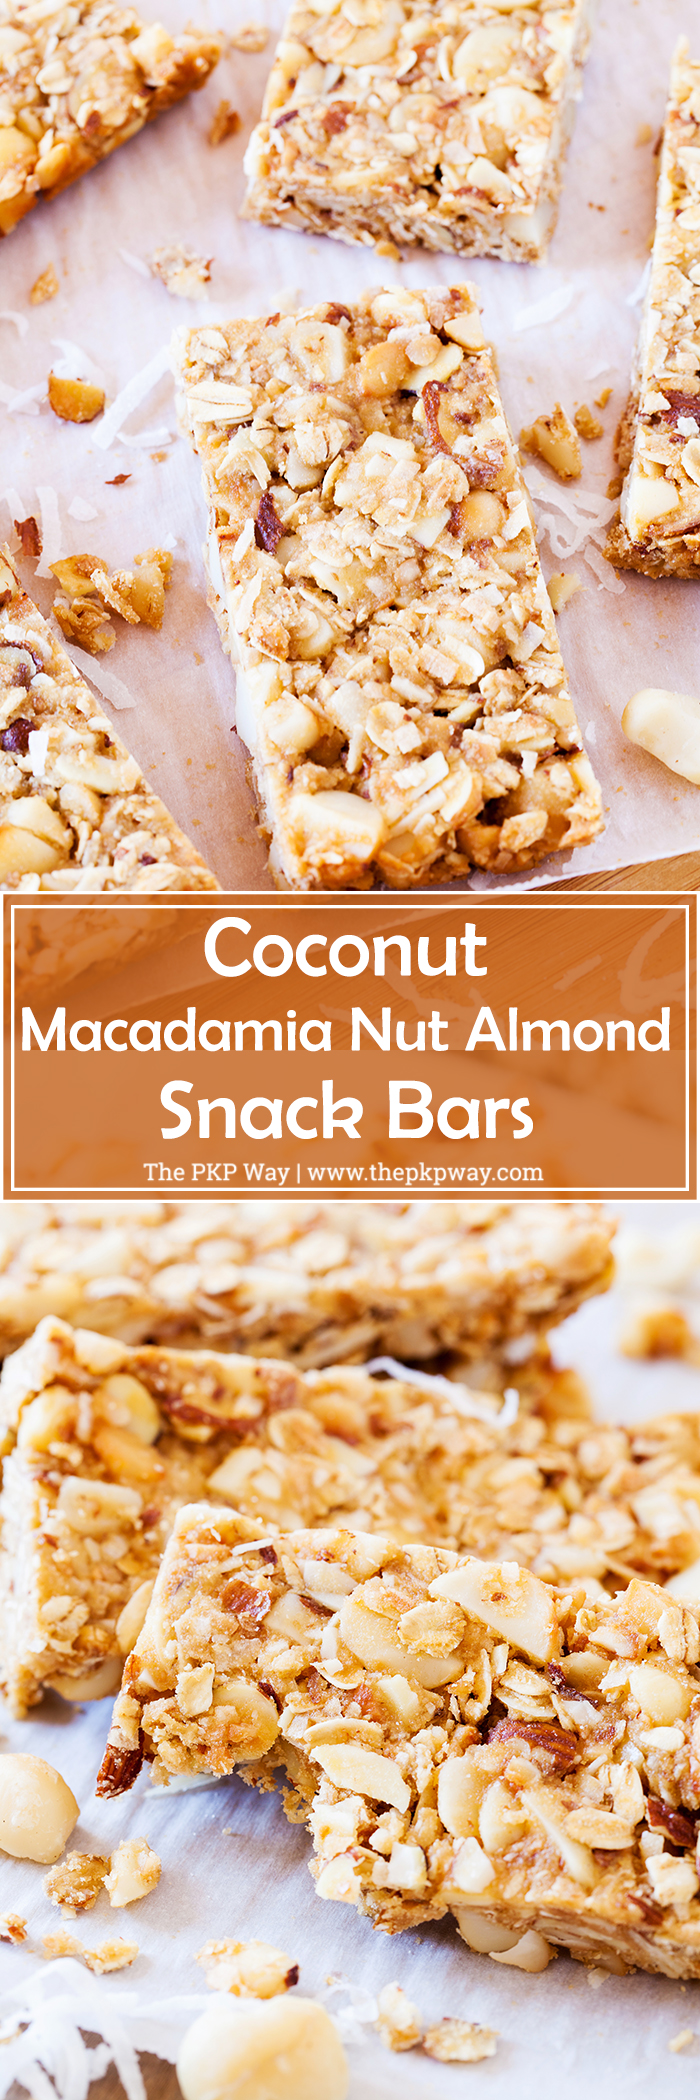 These Coconut Macadamia Nut Almond Snack Bars are perfect for an after school snack and will fill your mouth with warm, tropical flavors.